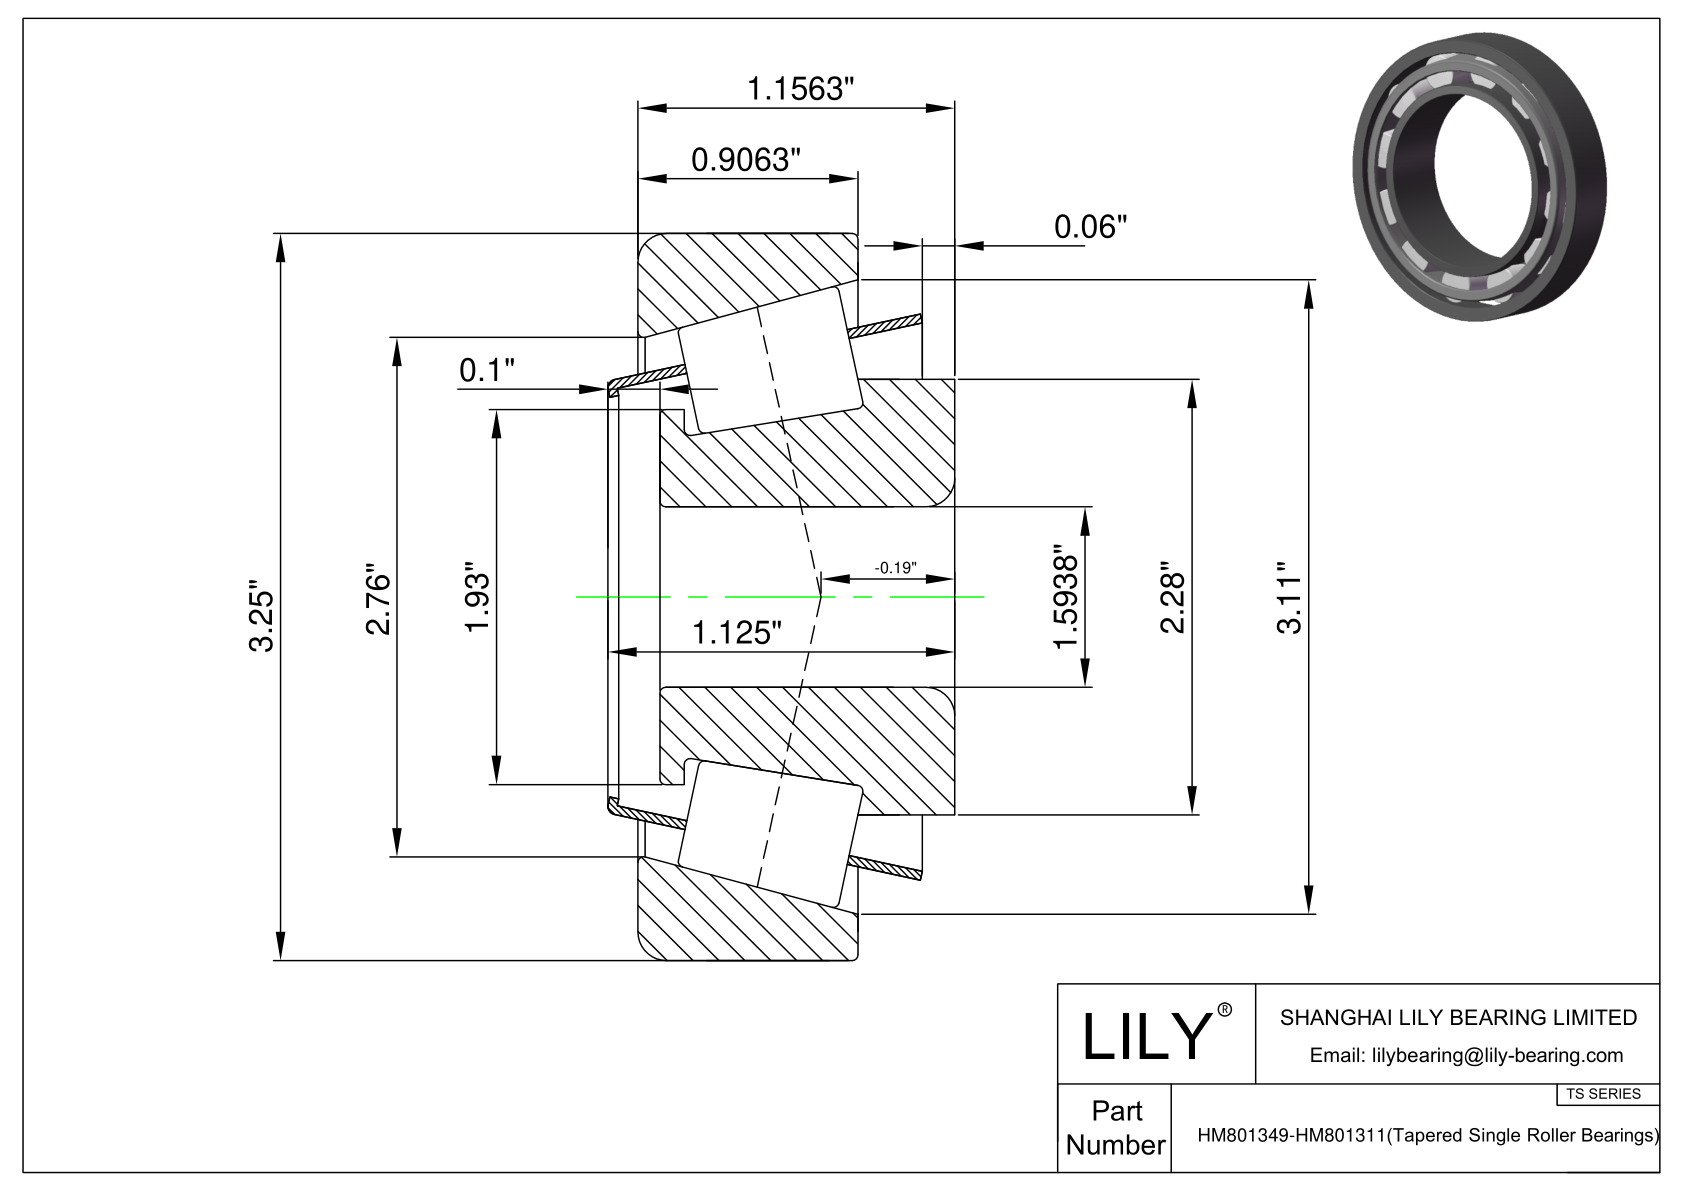 HM801349-HM801311 TS (Tapered Single Roller Bearings) (Imperial) cad drawing